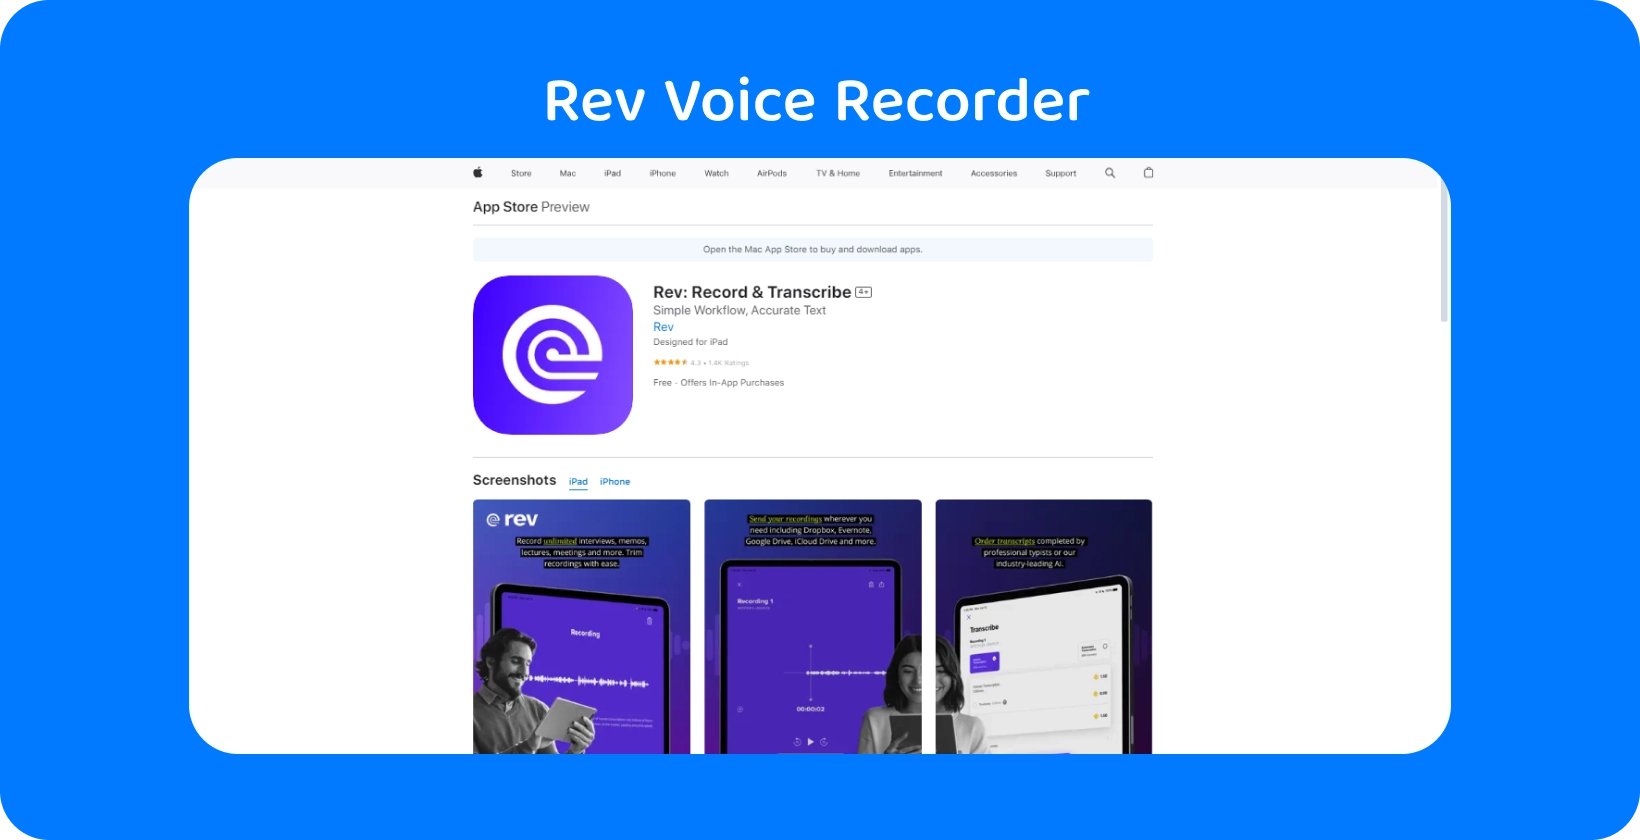 Rev Voice Recorder app in the Apple App Store, highlighting its sleek design and transcription features.